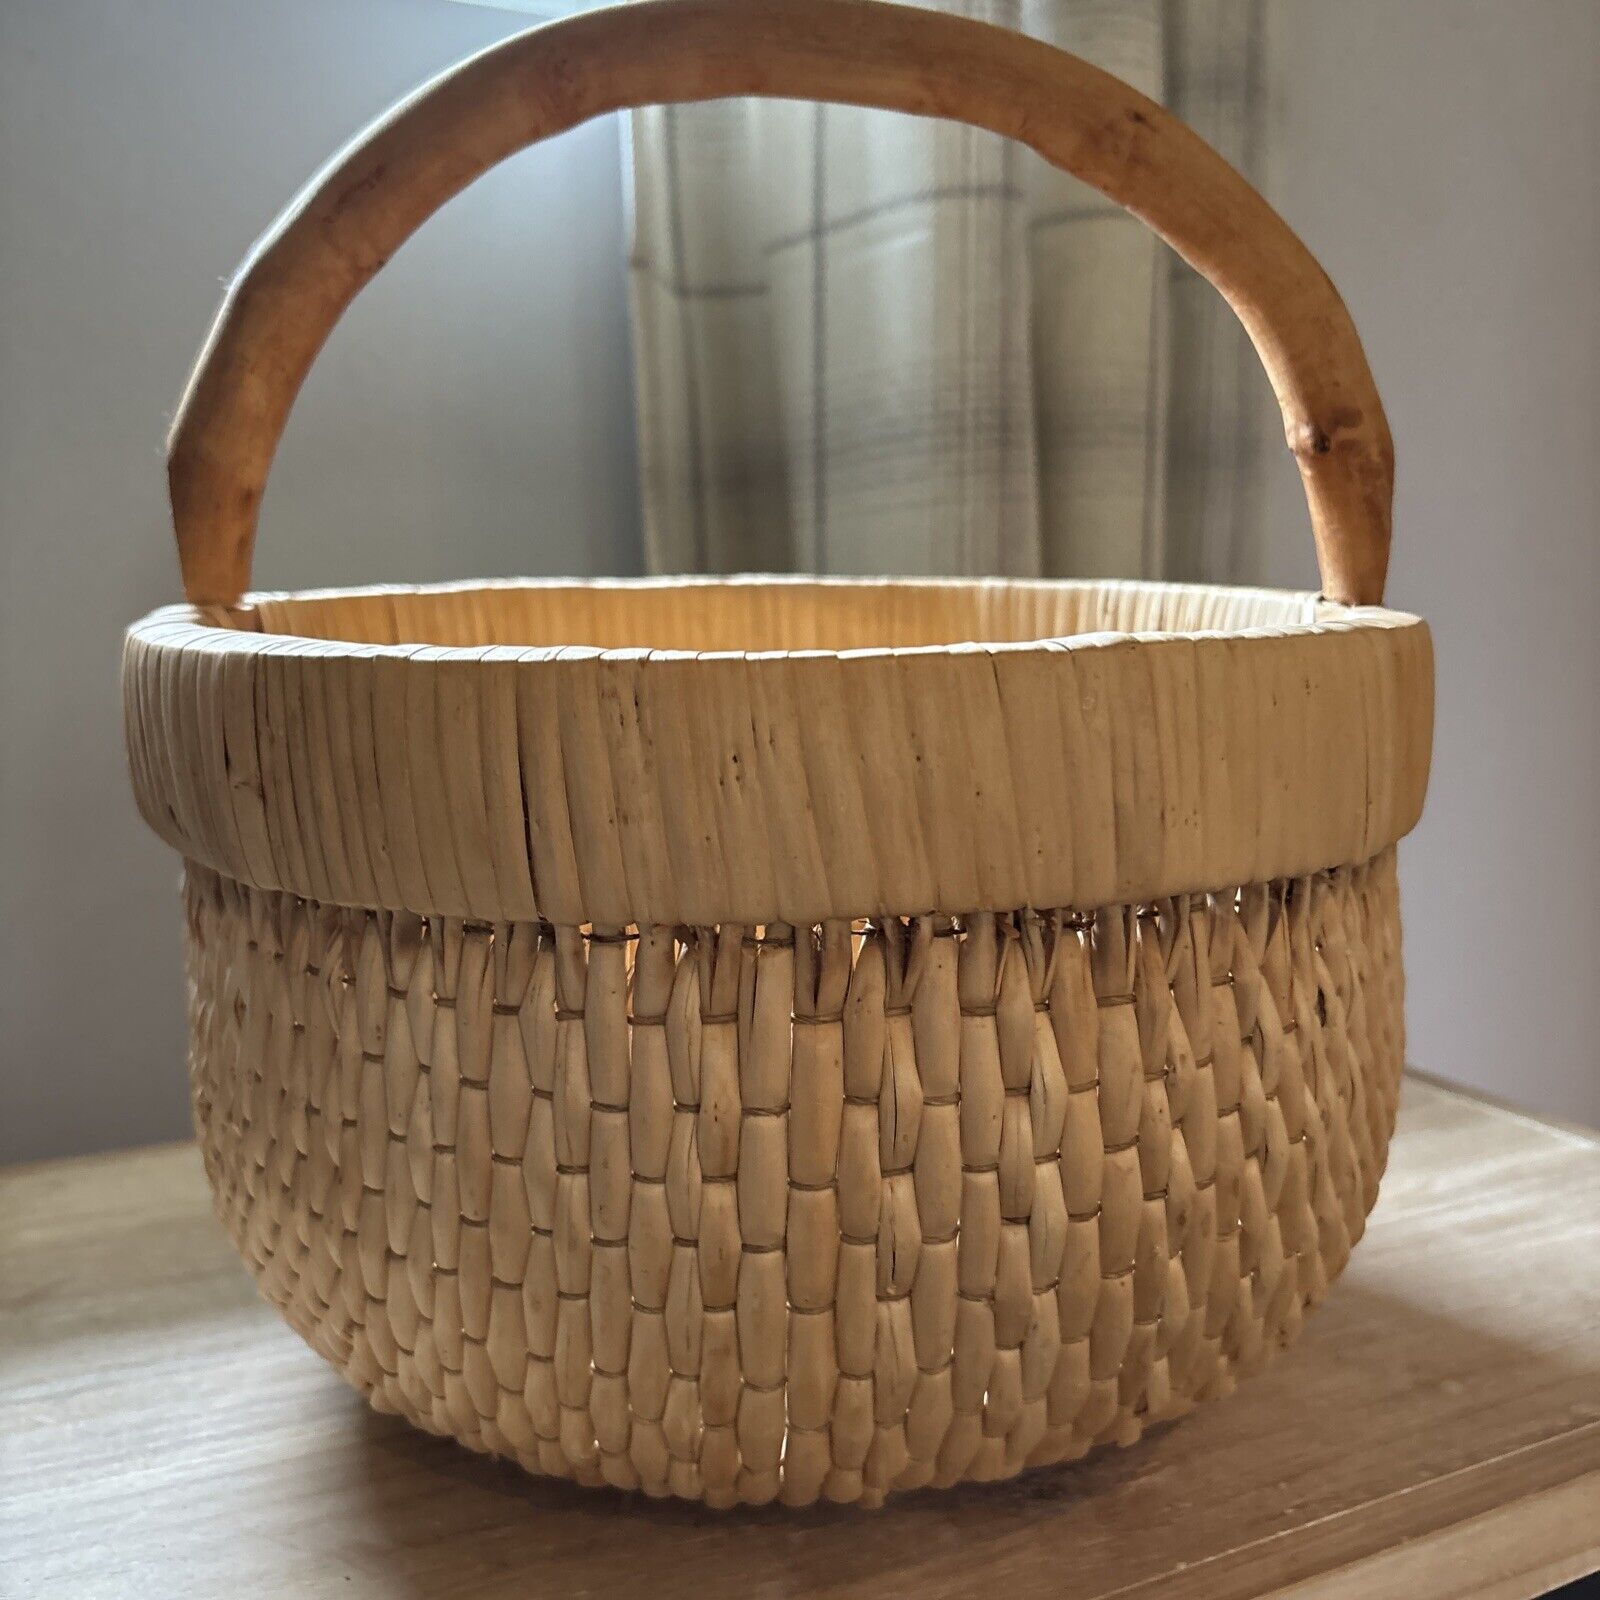 Vintage Large Woven Straw Wicker Basket With Wooden Handles 11” Tall 36” Round